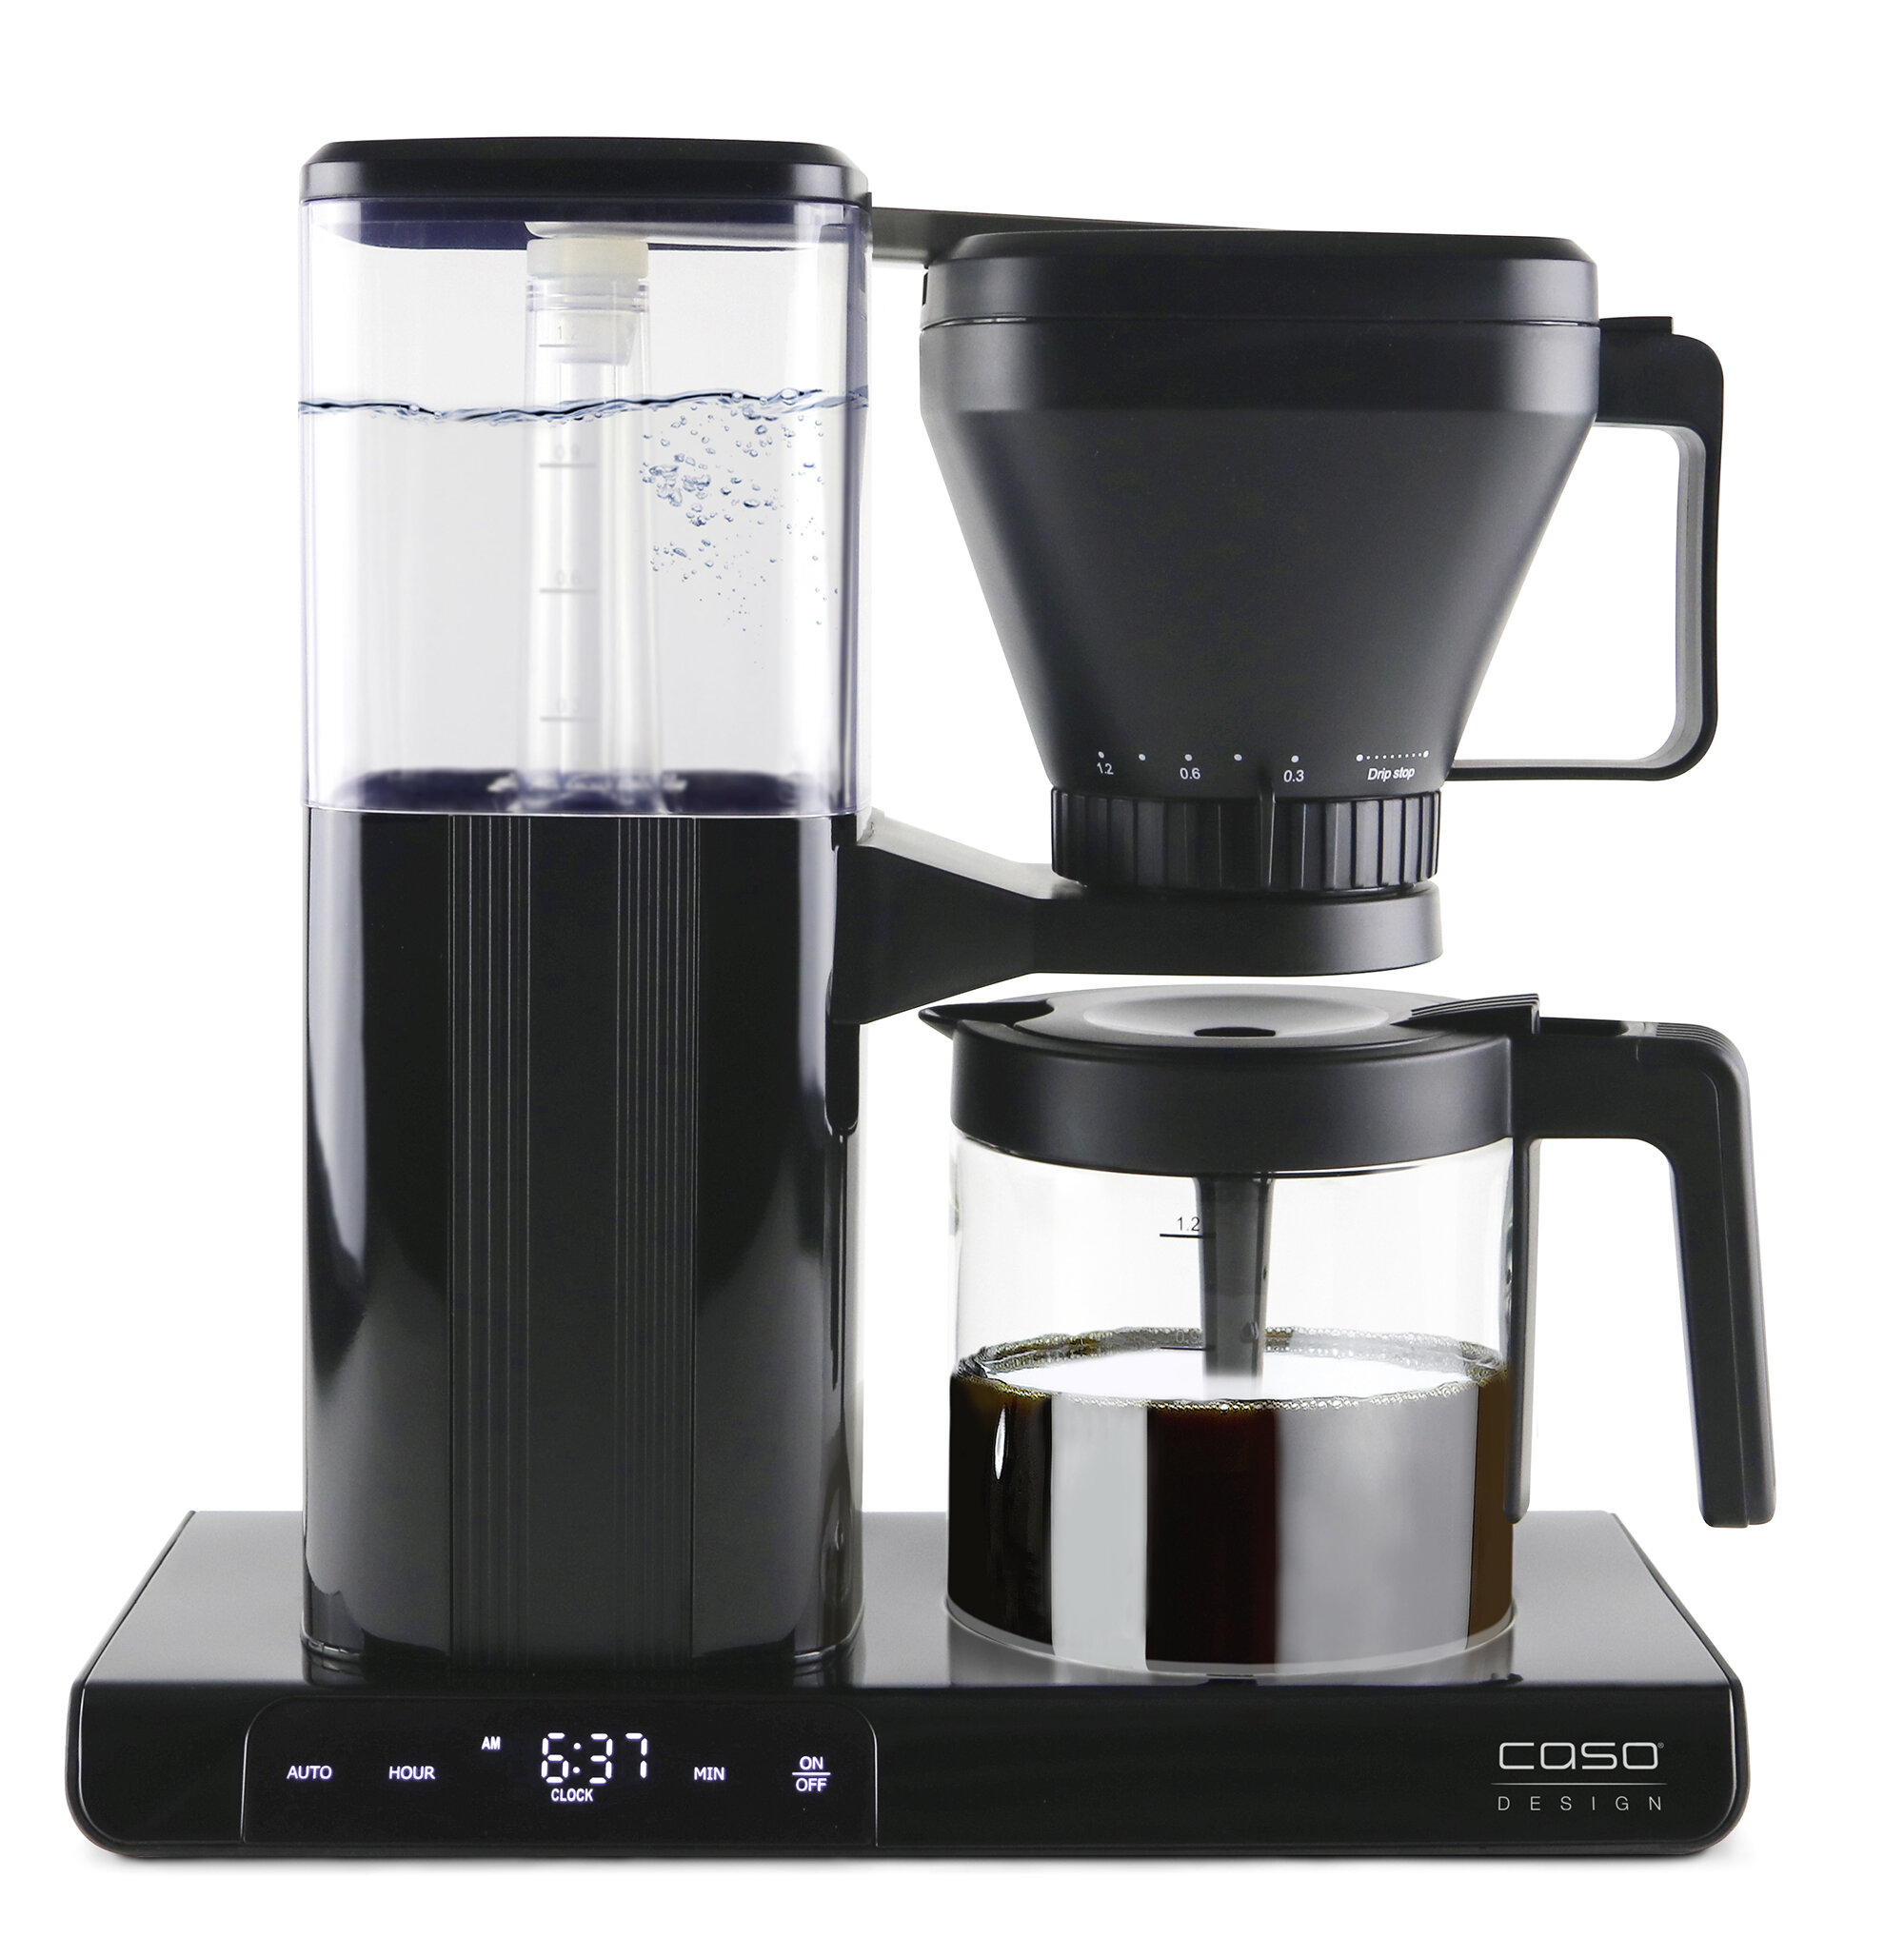 Caso Gourmet Gold Cup Coffee Maker: Programmable Timer, 8 Cups, Brews Coffee  at 205F